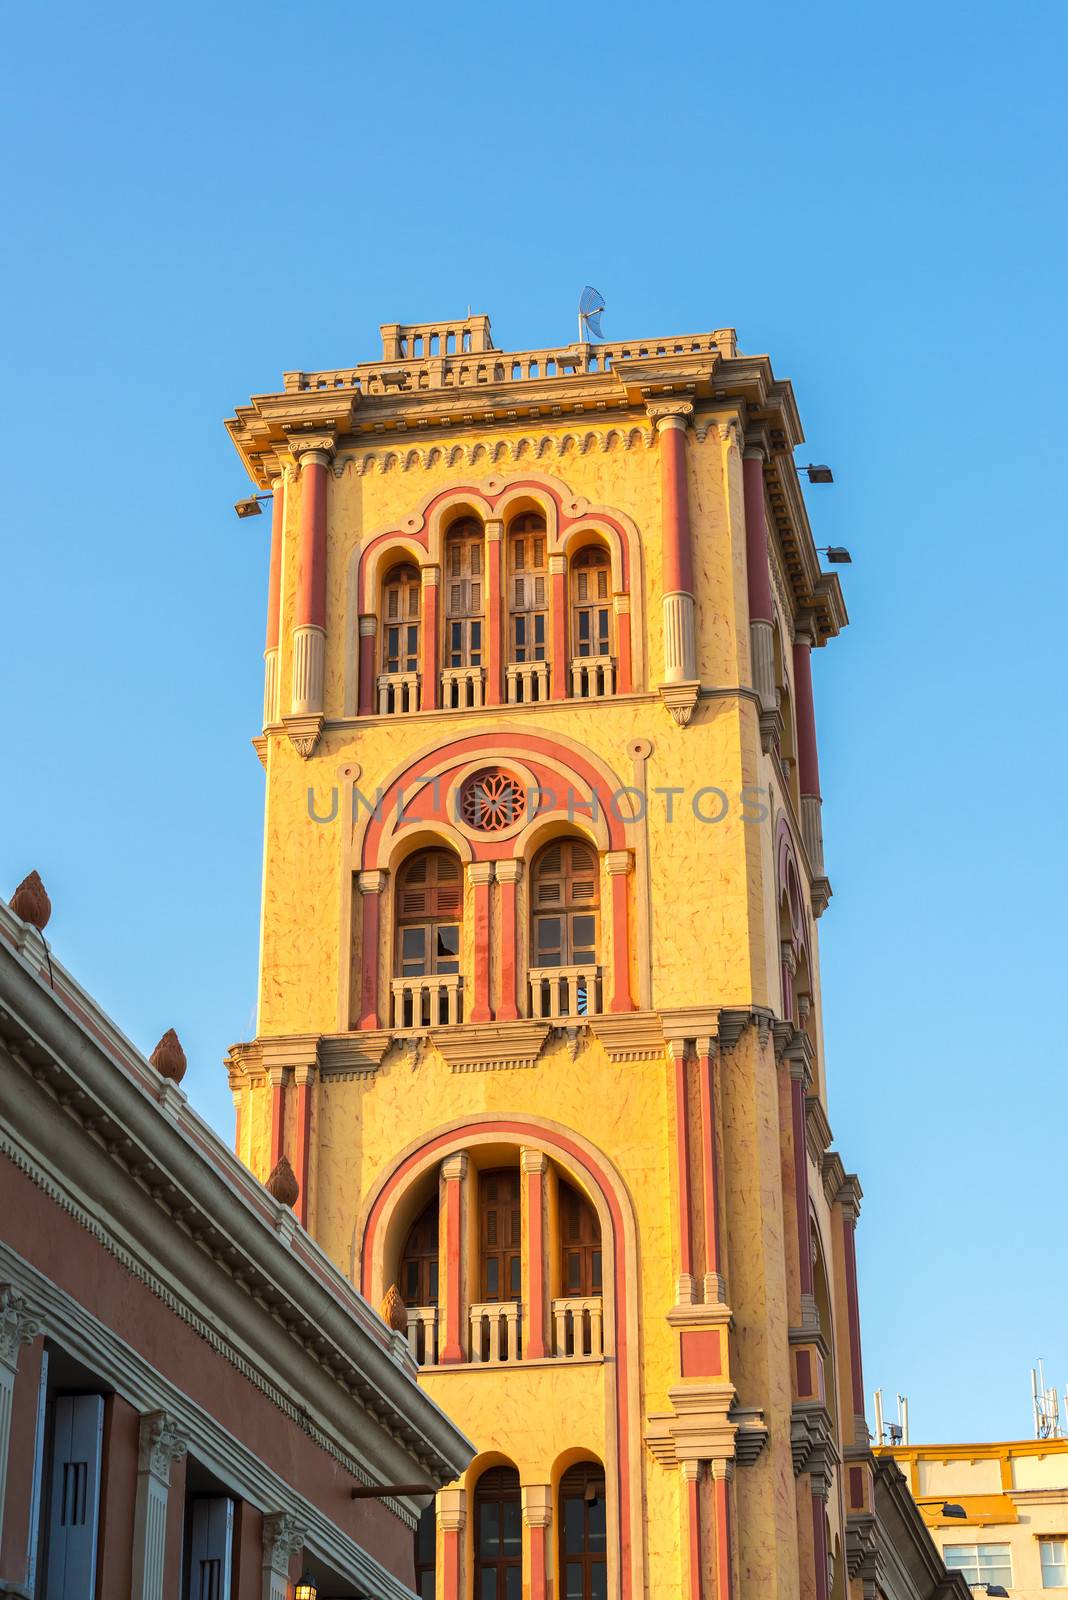 Tower of Cartagena Public University bathed in golden late afternoon light in Cartagena, Colombia